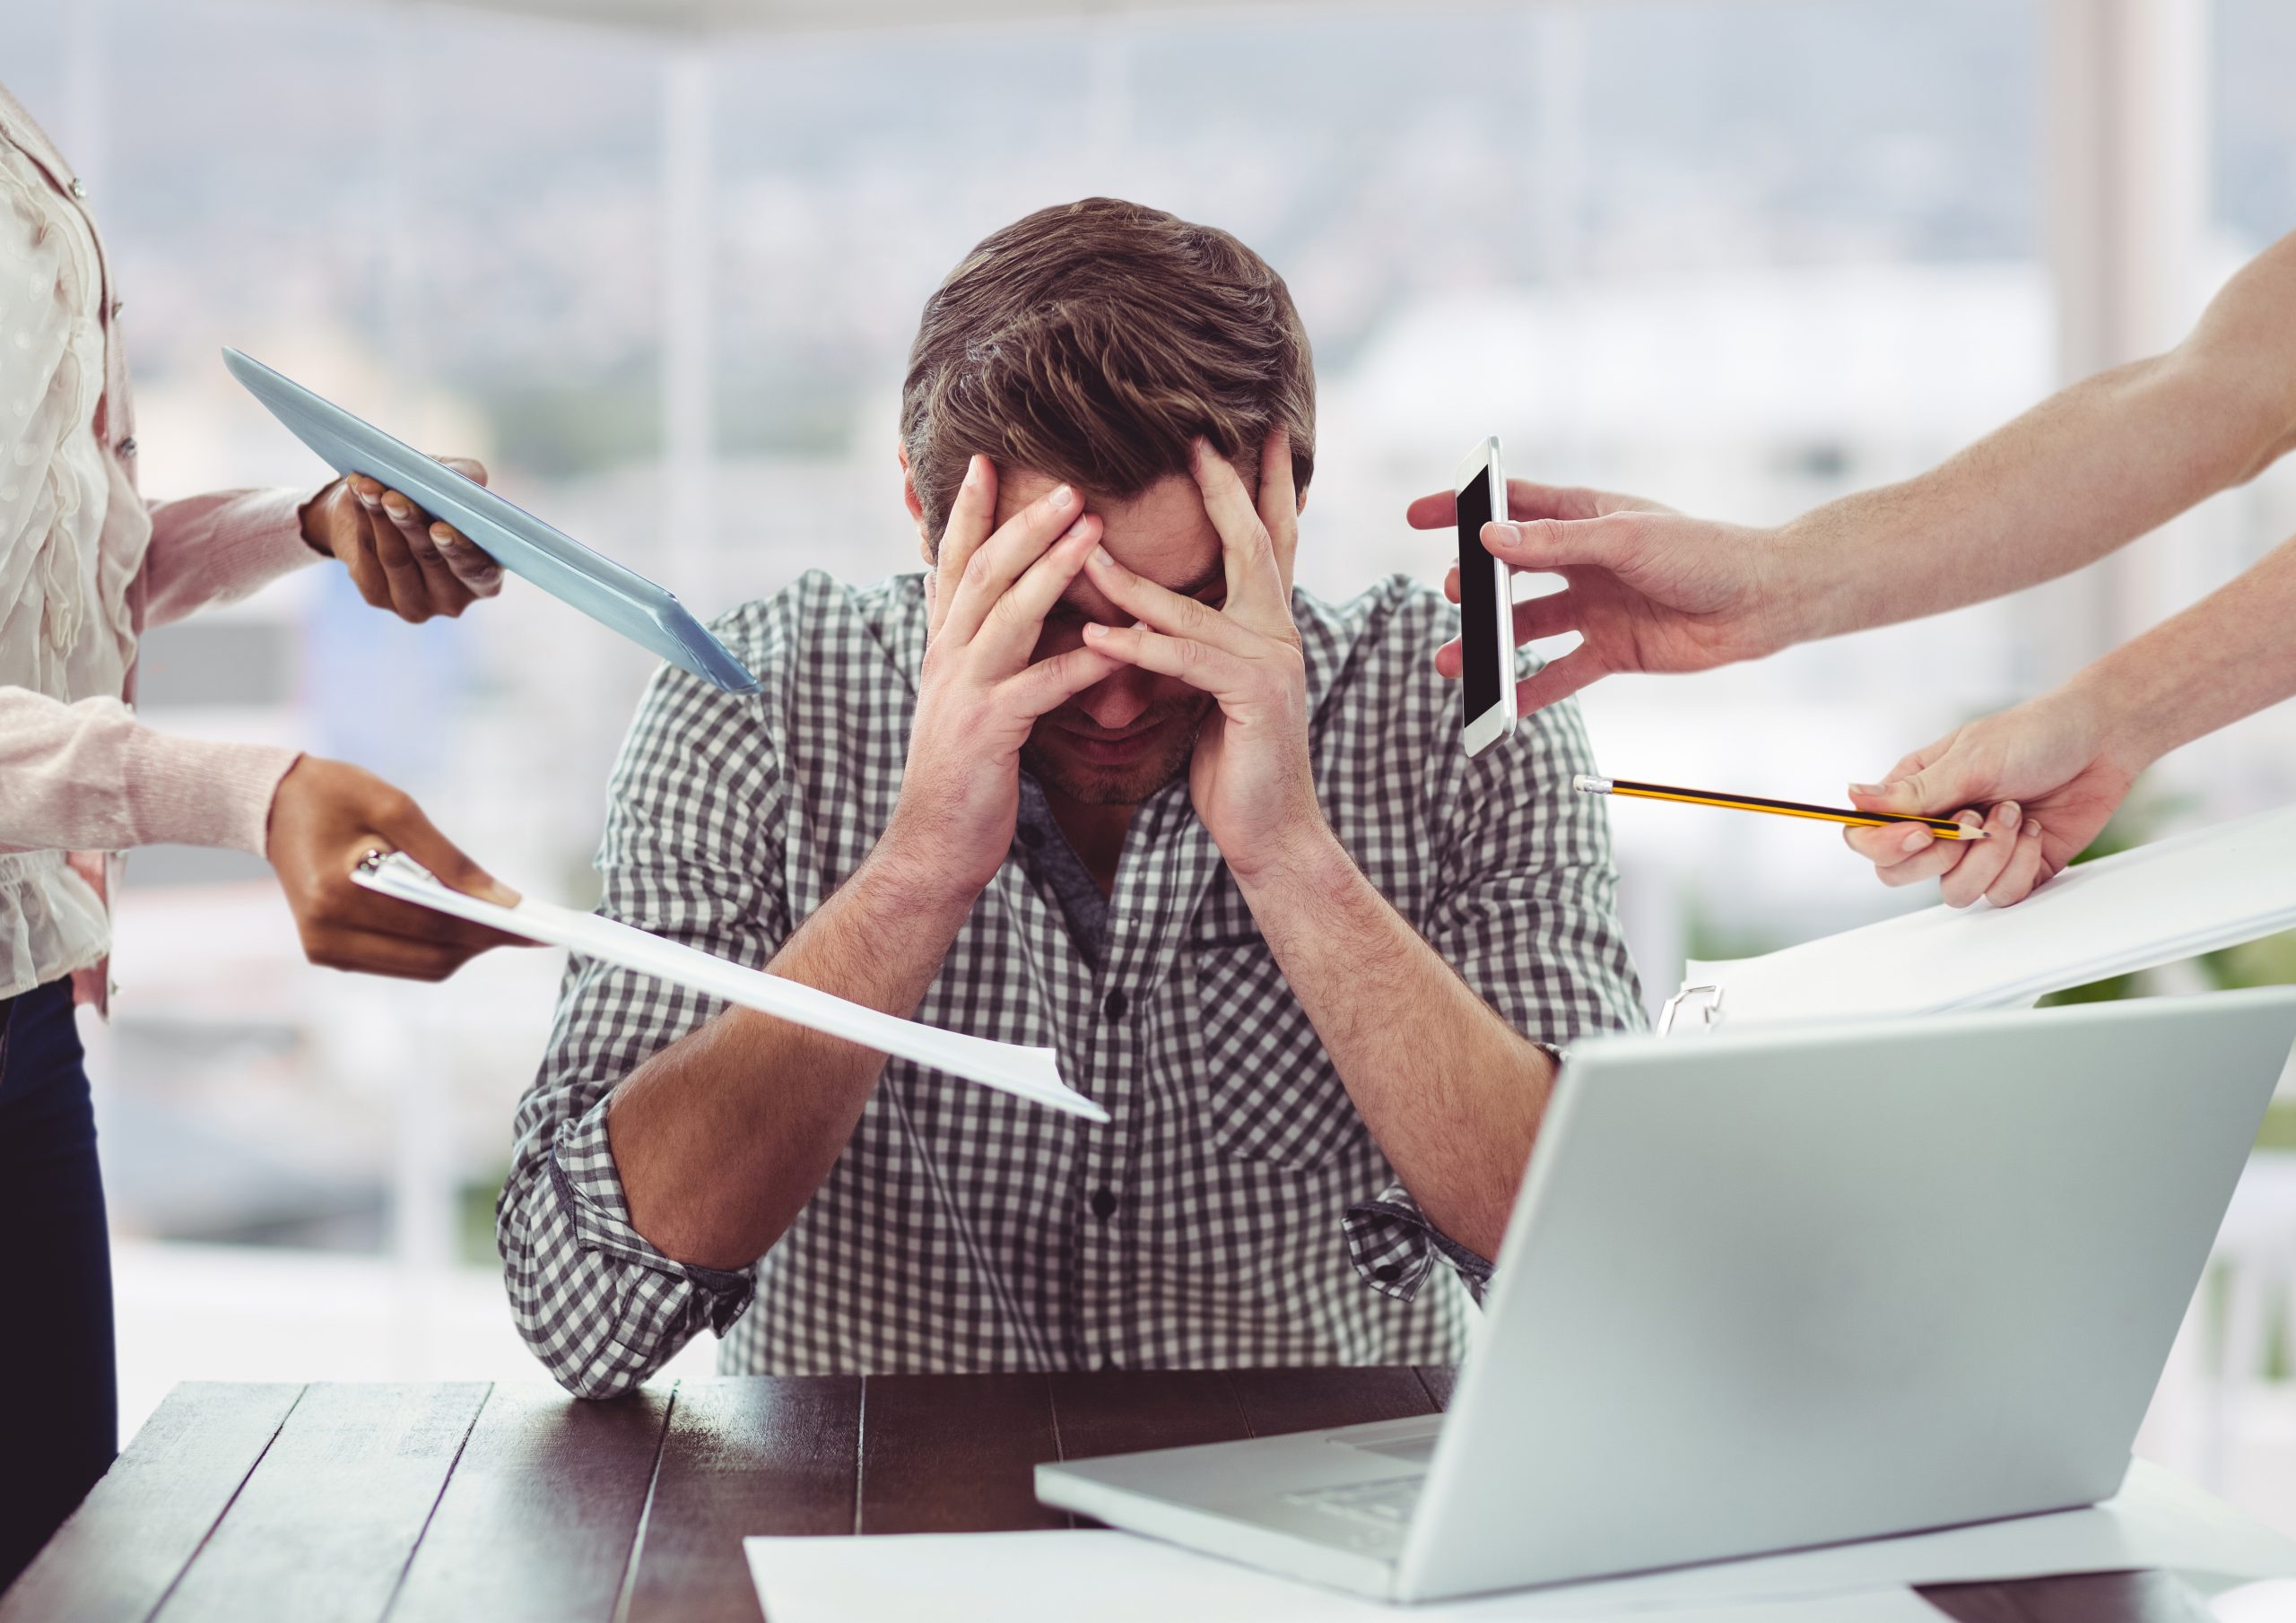 Stressed worker with devices in his face from other employees asking him to do work